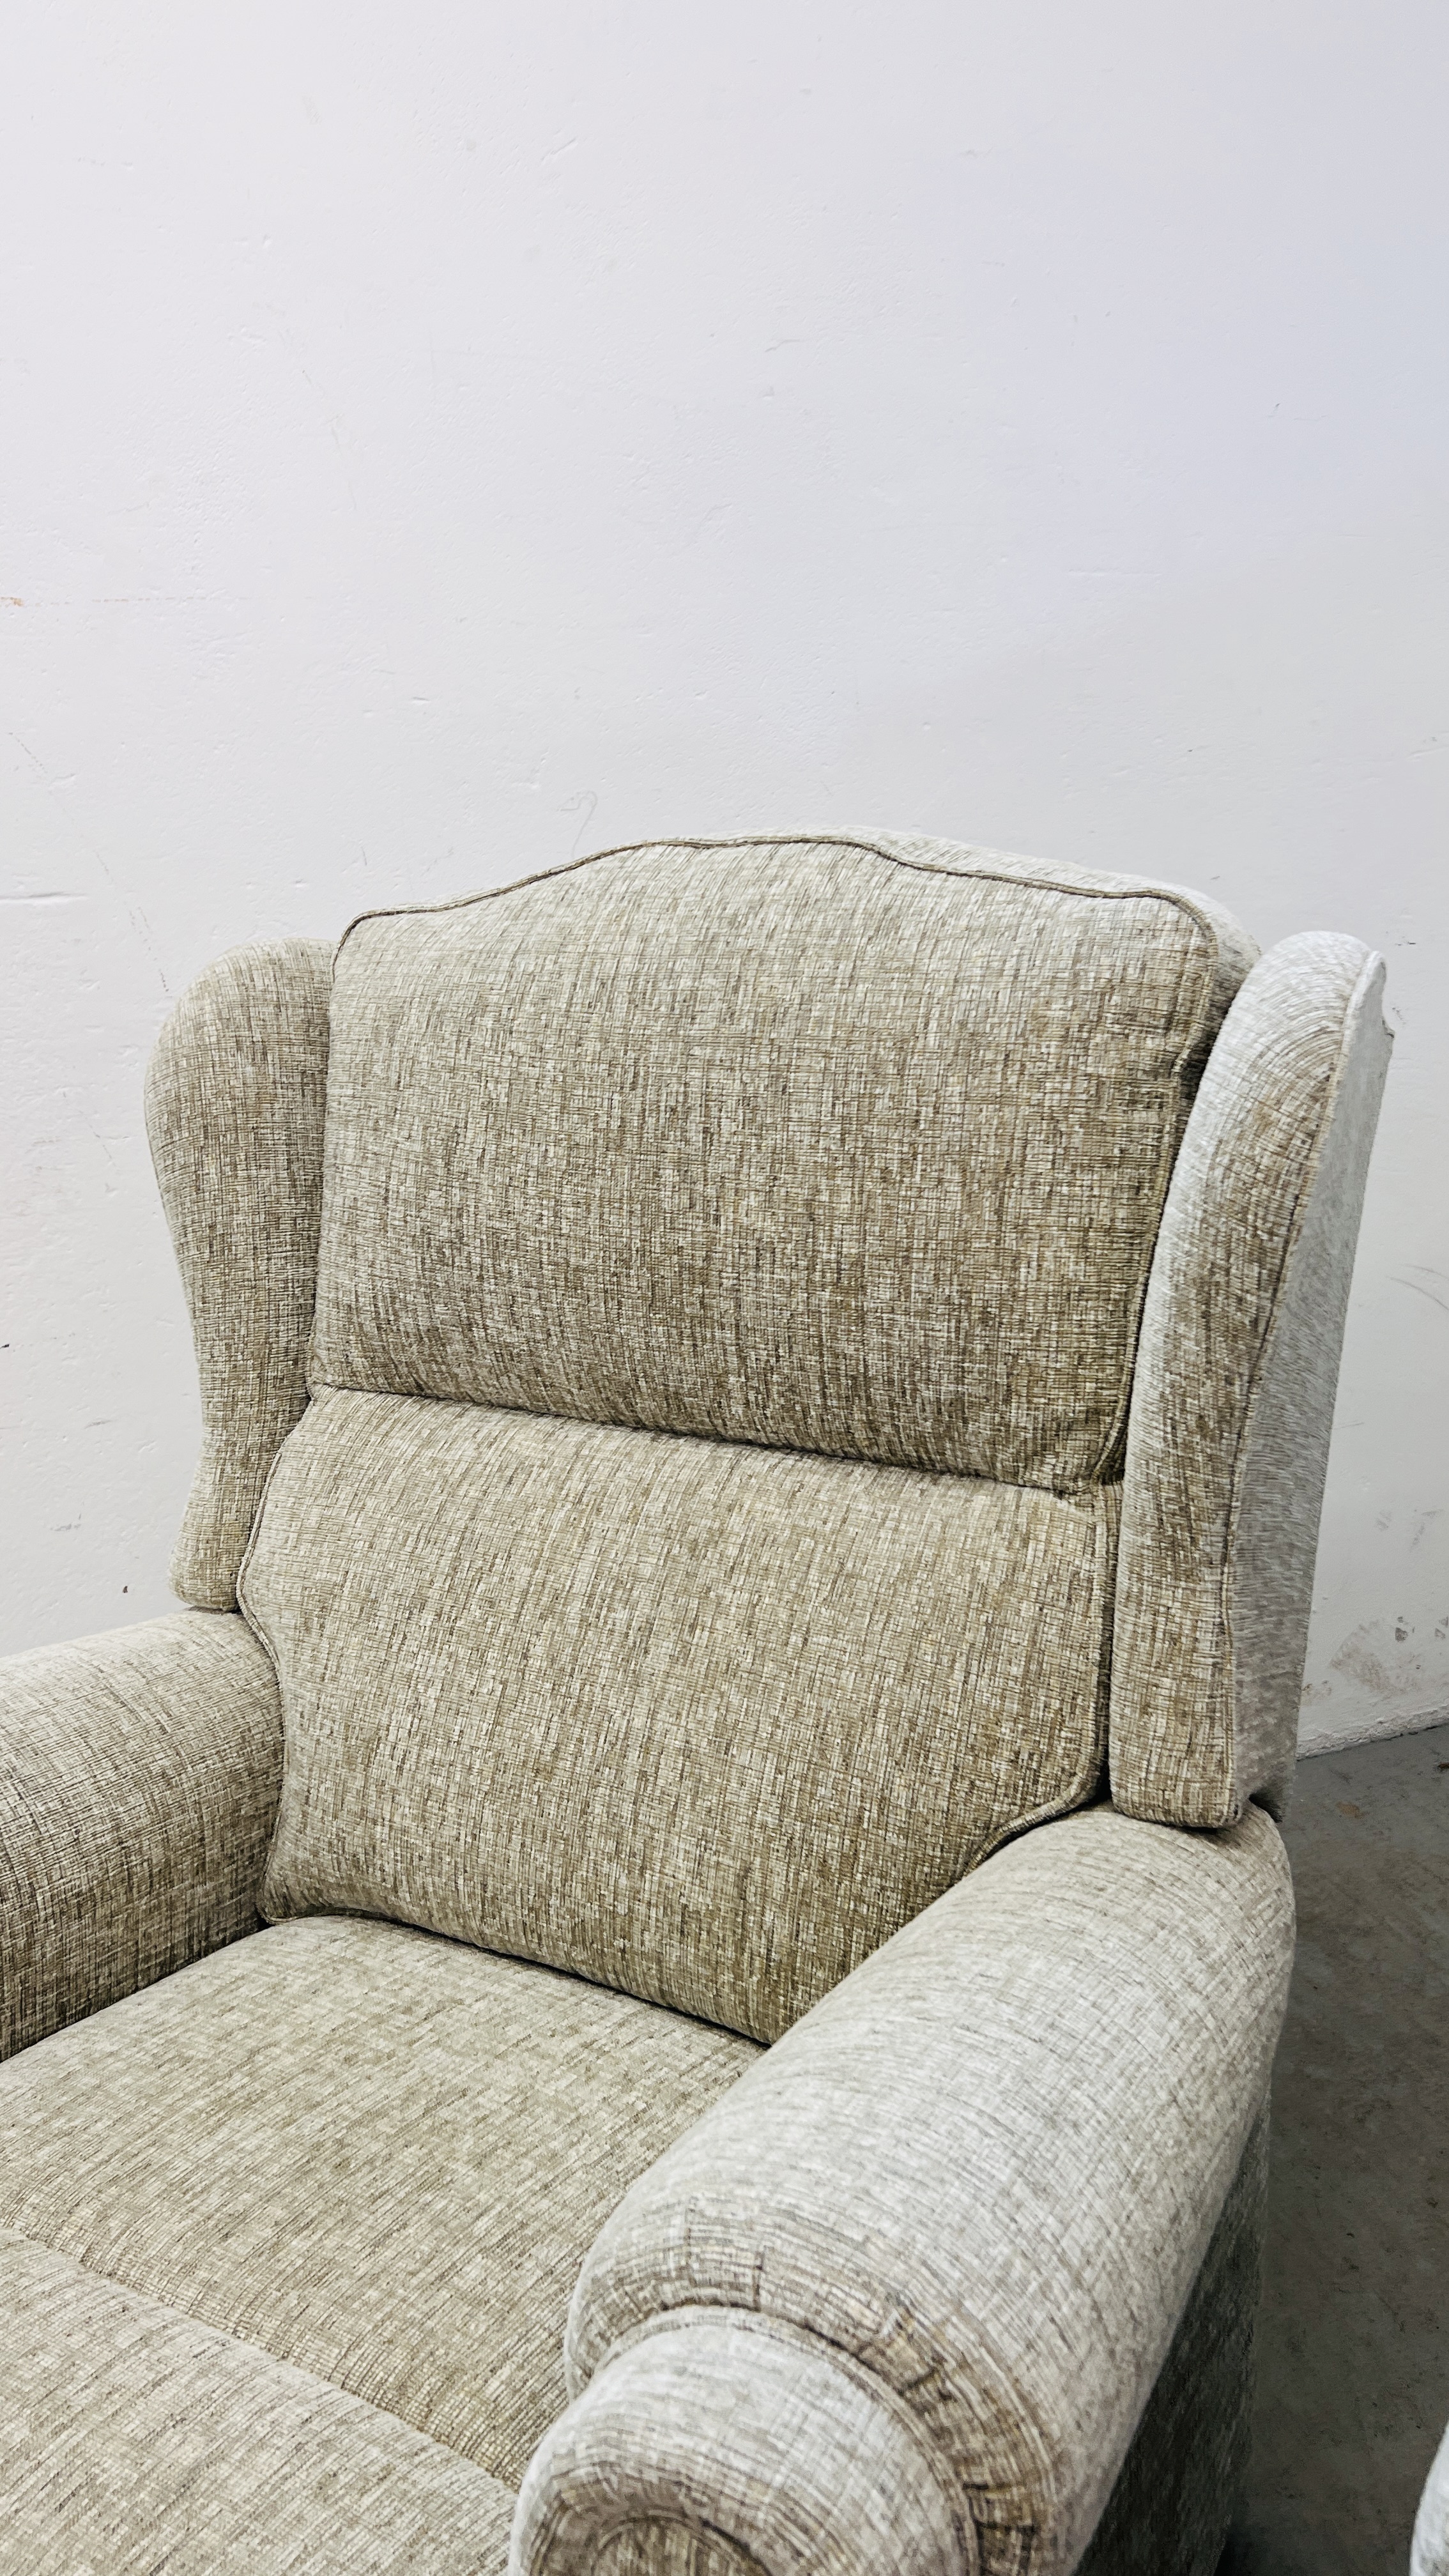 A GOOD QUALITY "SHERBORNE" TWO SEATER SOFA W 140CM X D 82CM X H 94CM ALONG WITH A MATCHING ARMCHAIR. - Image 9 of 14